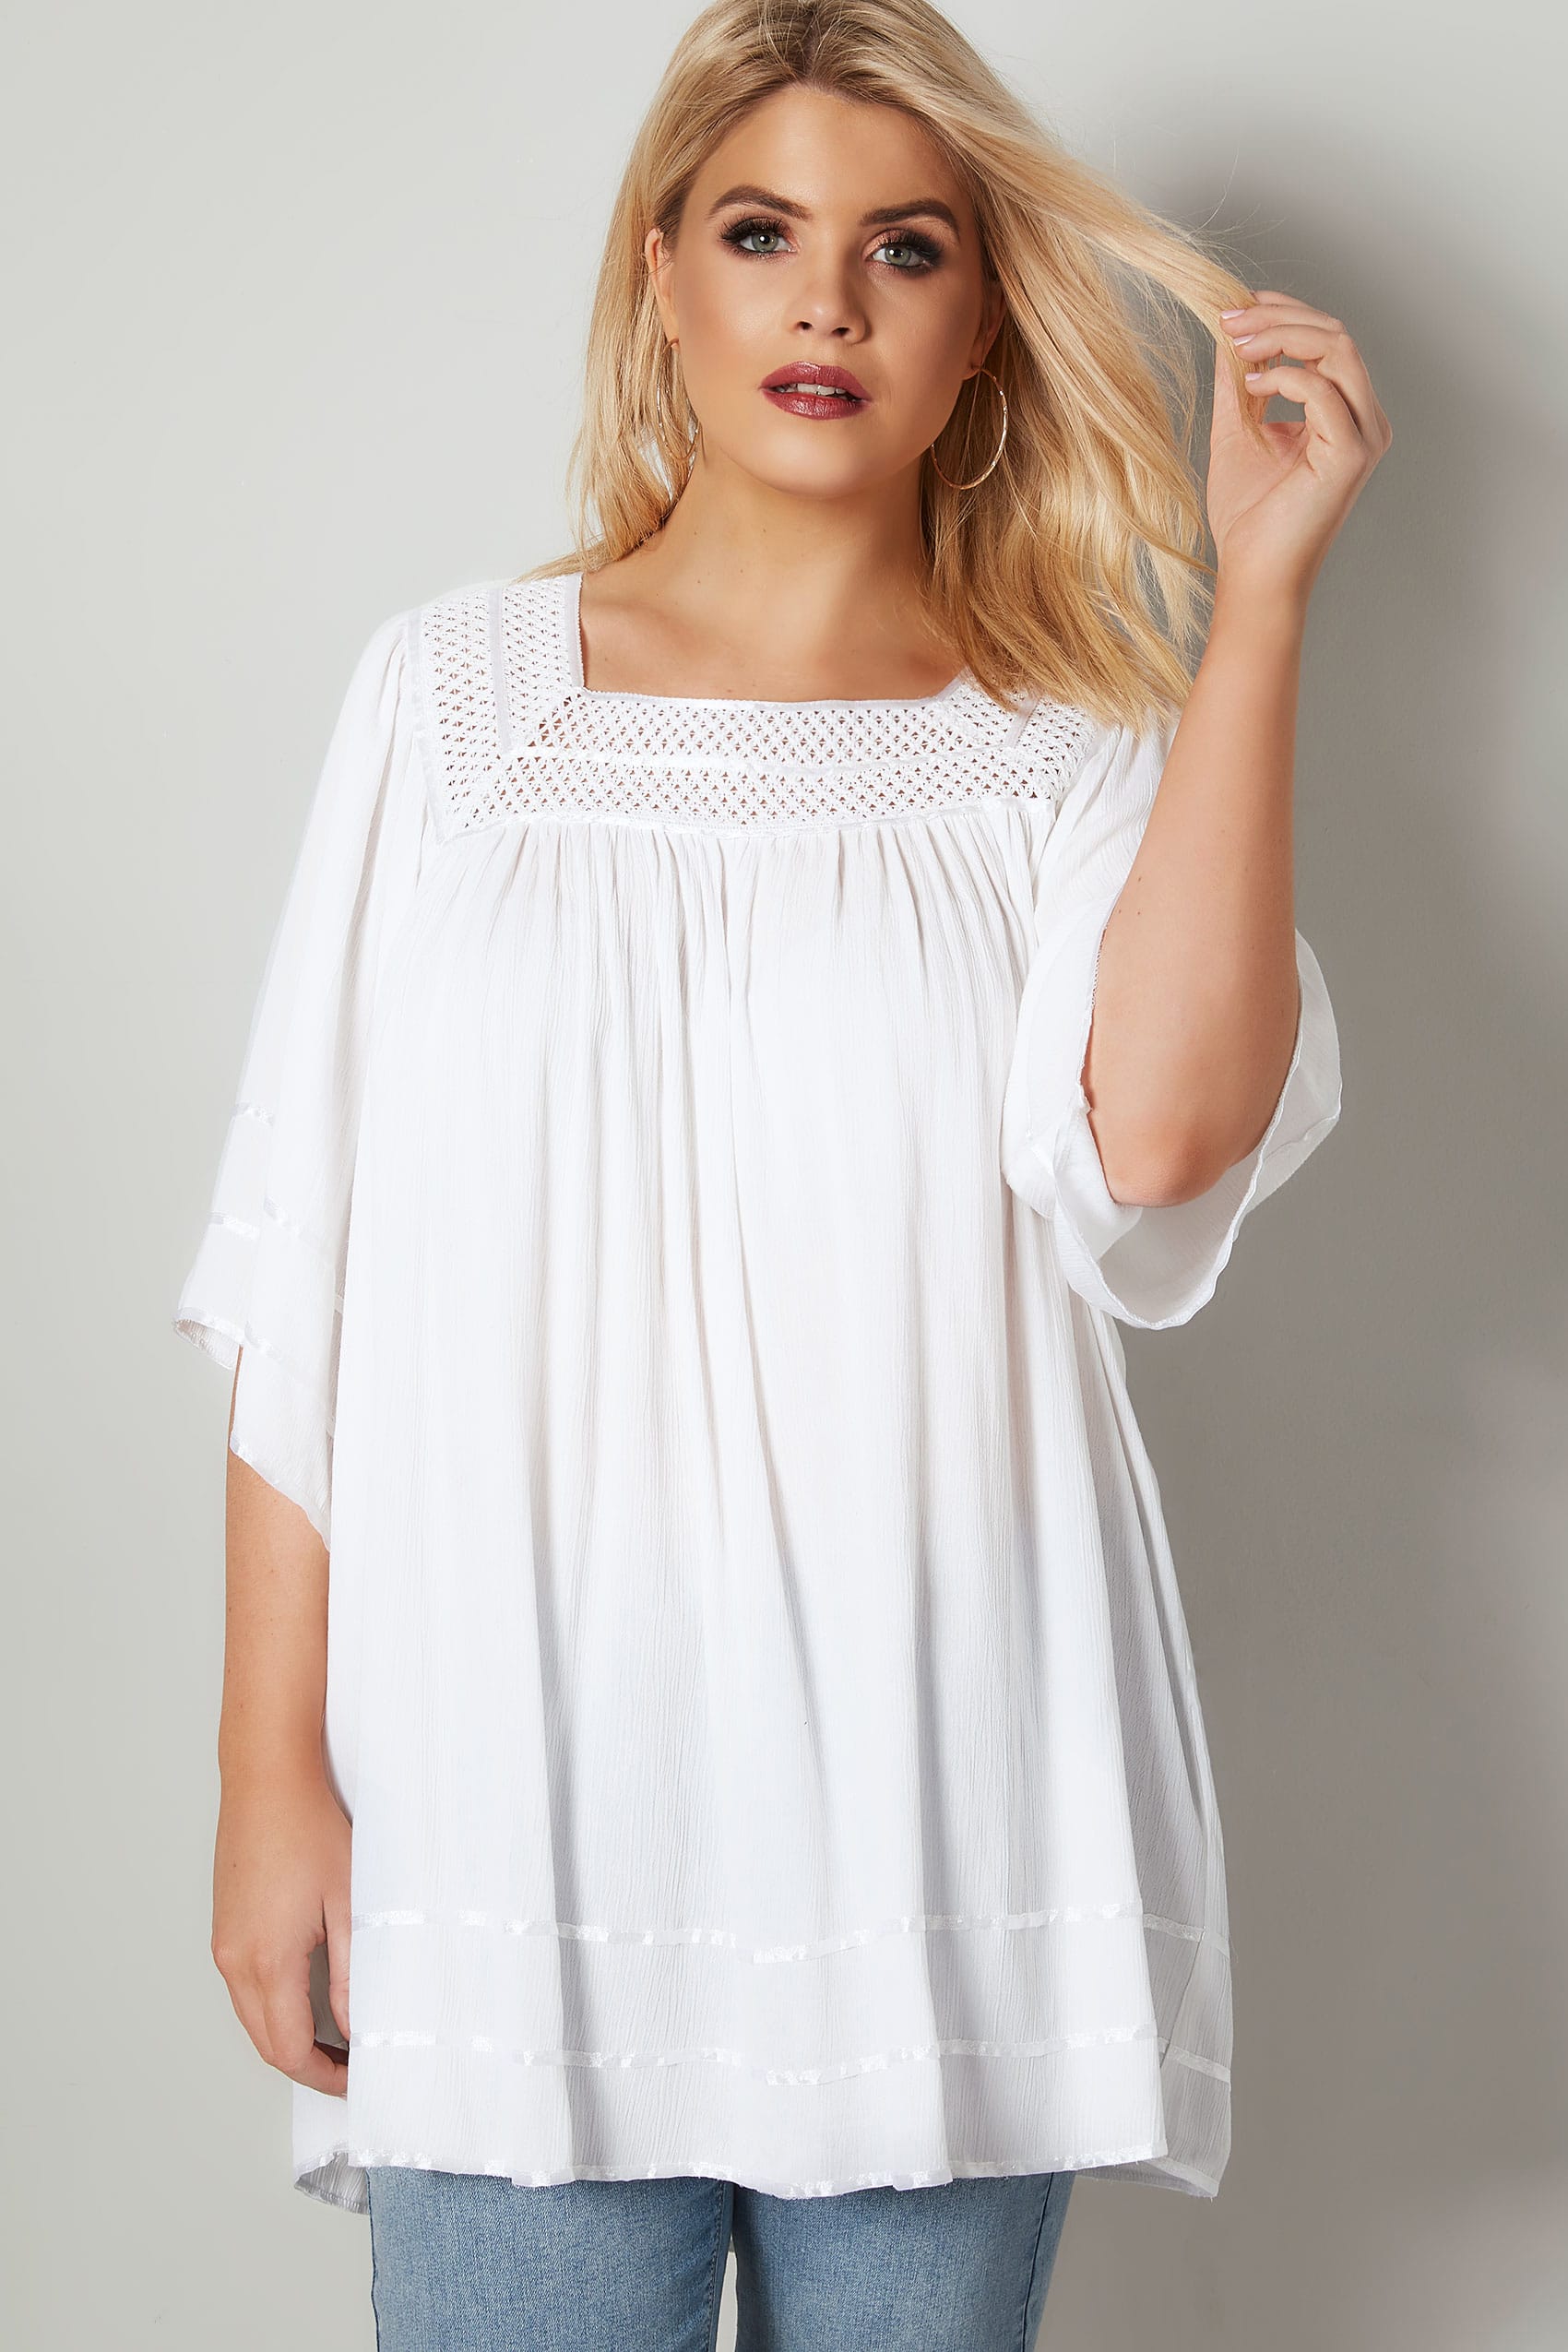 White Tipped Blouse With Crochet Neckline, plus size 16 to 36